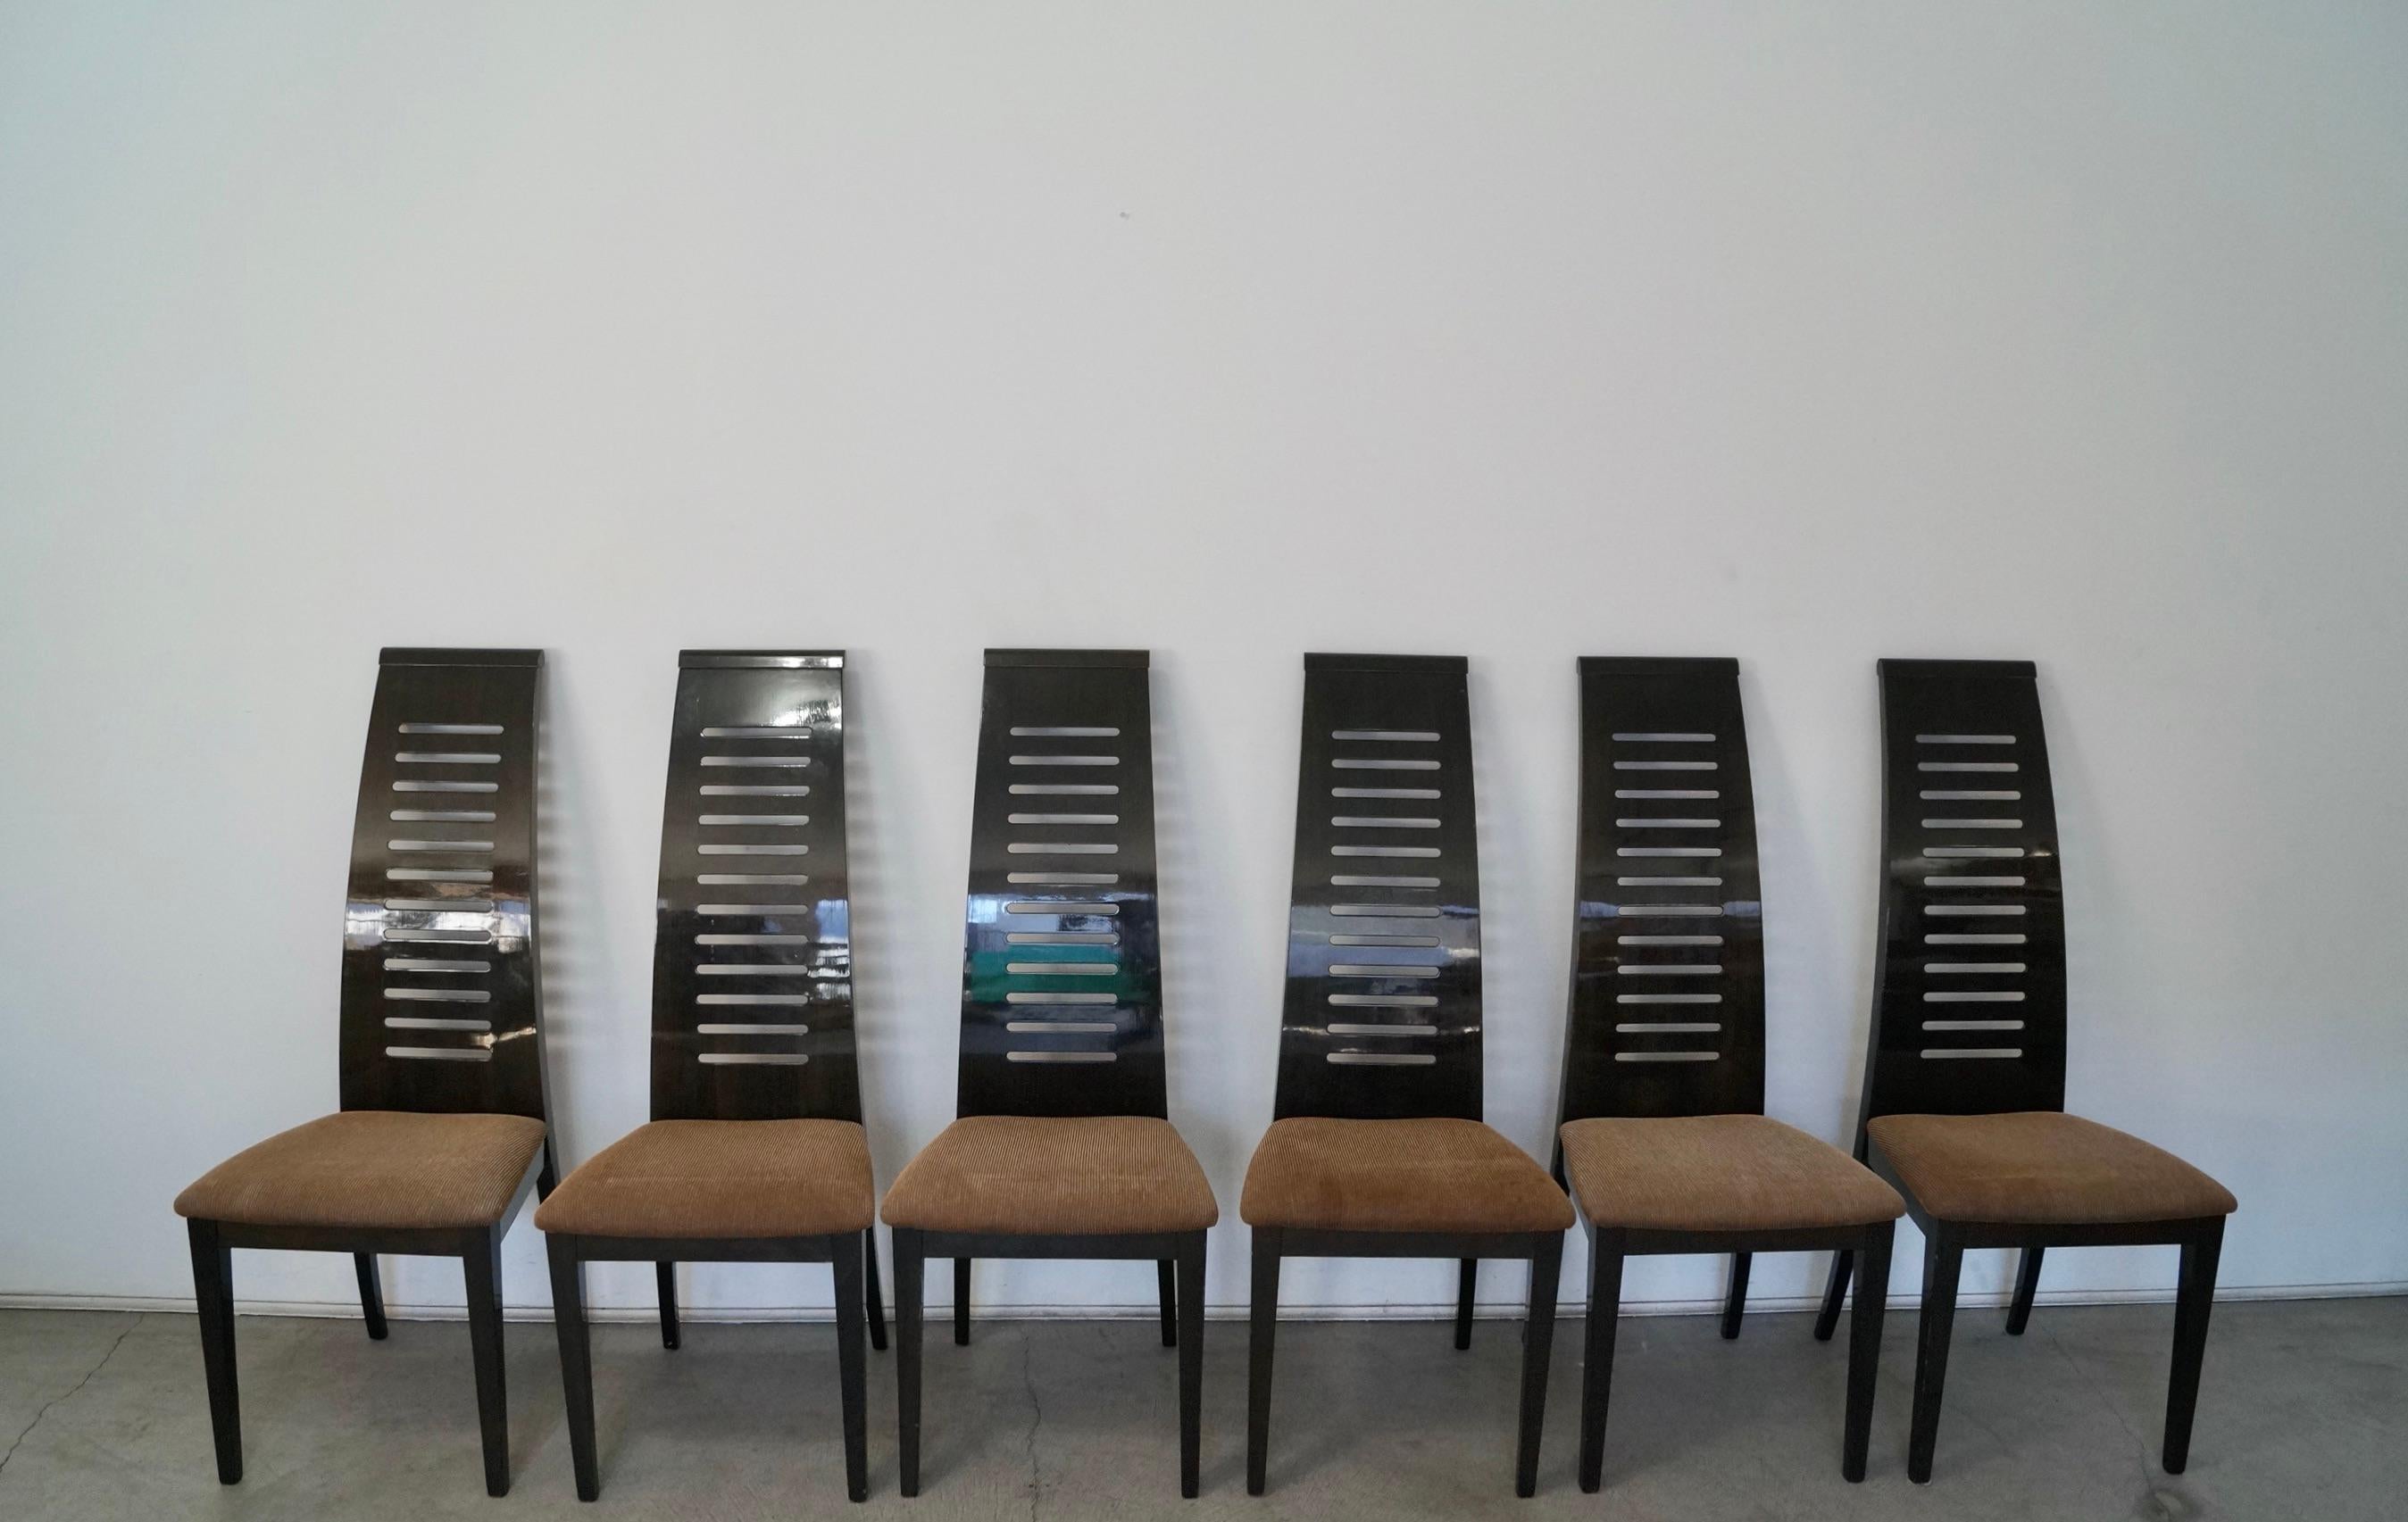 Vintage late 1990's / early 2000's six dining chairs for sale. Designed by Pietro Costantini for Ello Furniture, and manufactured in Italy. They are very solid and well built chairs, and are lacquered. They have a solid dark wood frame, and have the